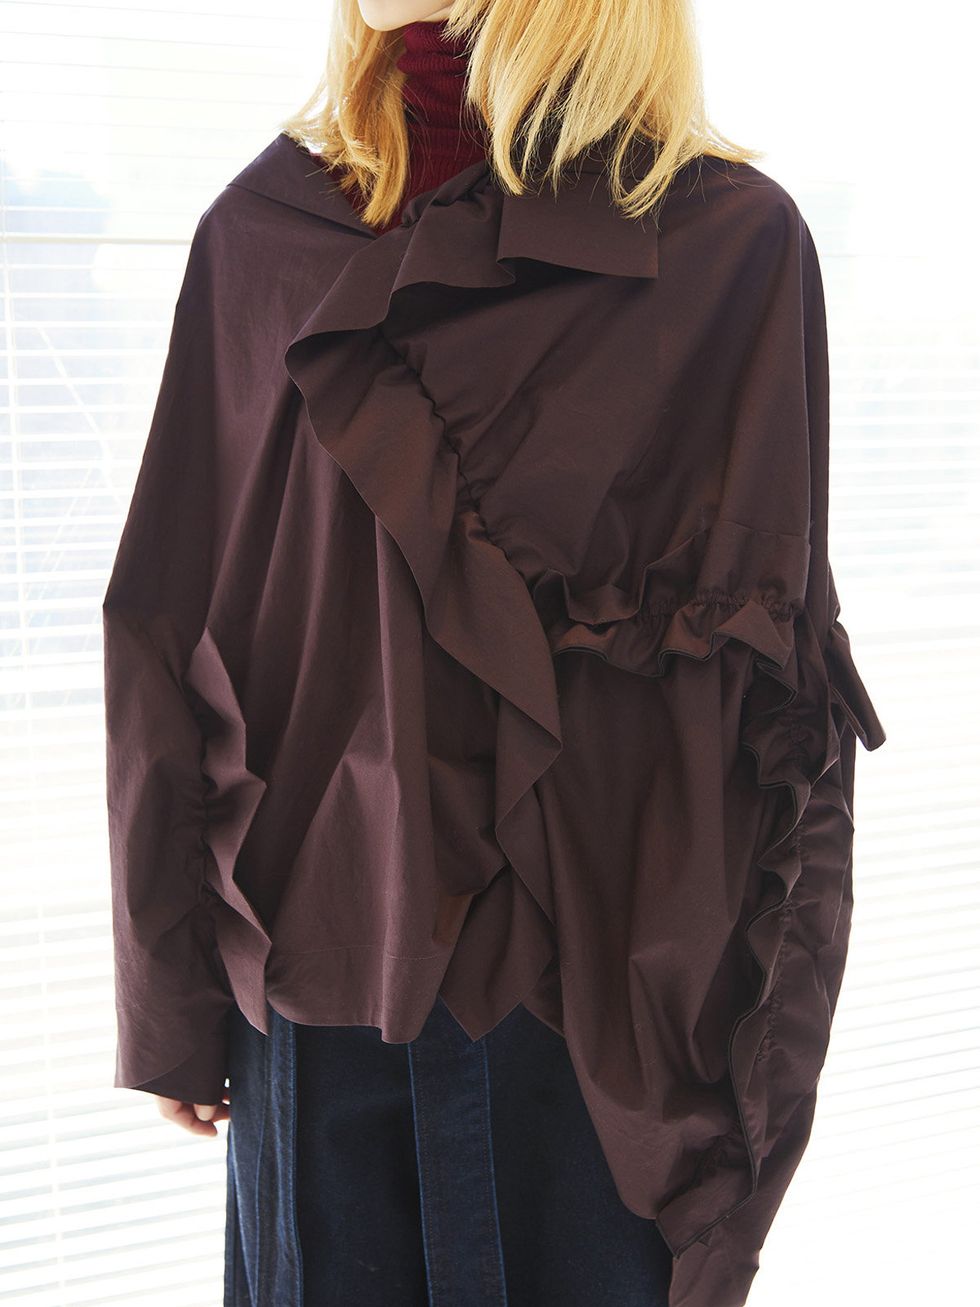 Clothing, Outerwear, Sleeve, Blouse, Shoulder, Neck, Costume, Cape, Mantle, Top, 